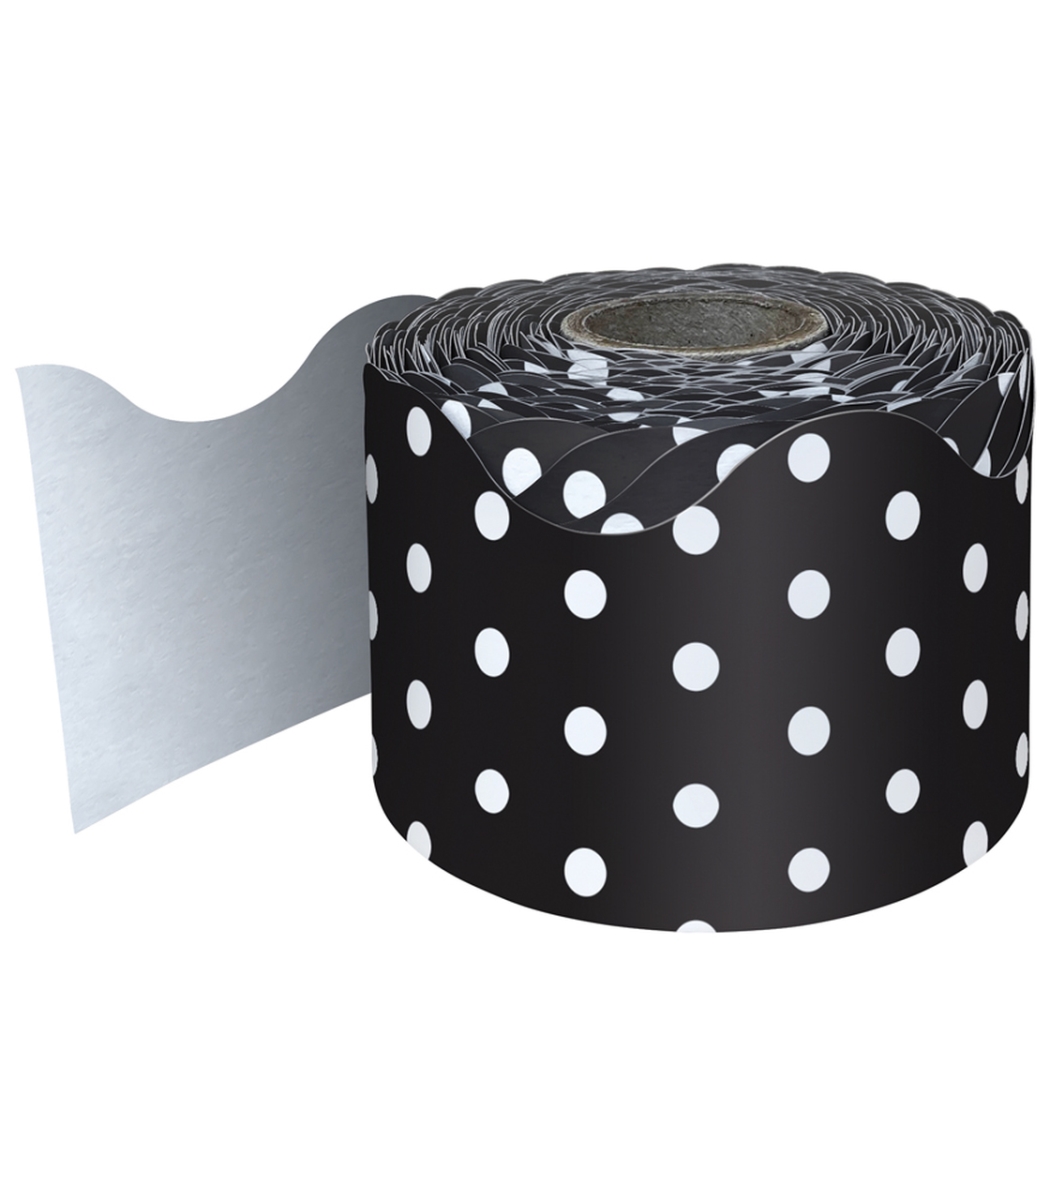 Picture of Carson Dellosa Education CD-108474-3 Rolled Scalloped Borders, Black with White Polka Dots - 3 Roll